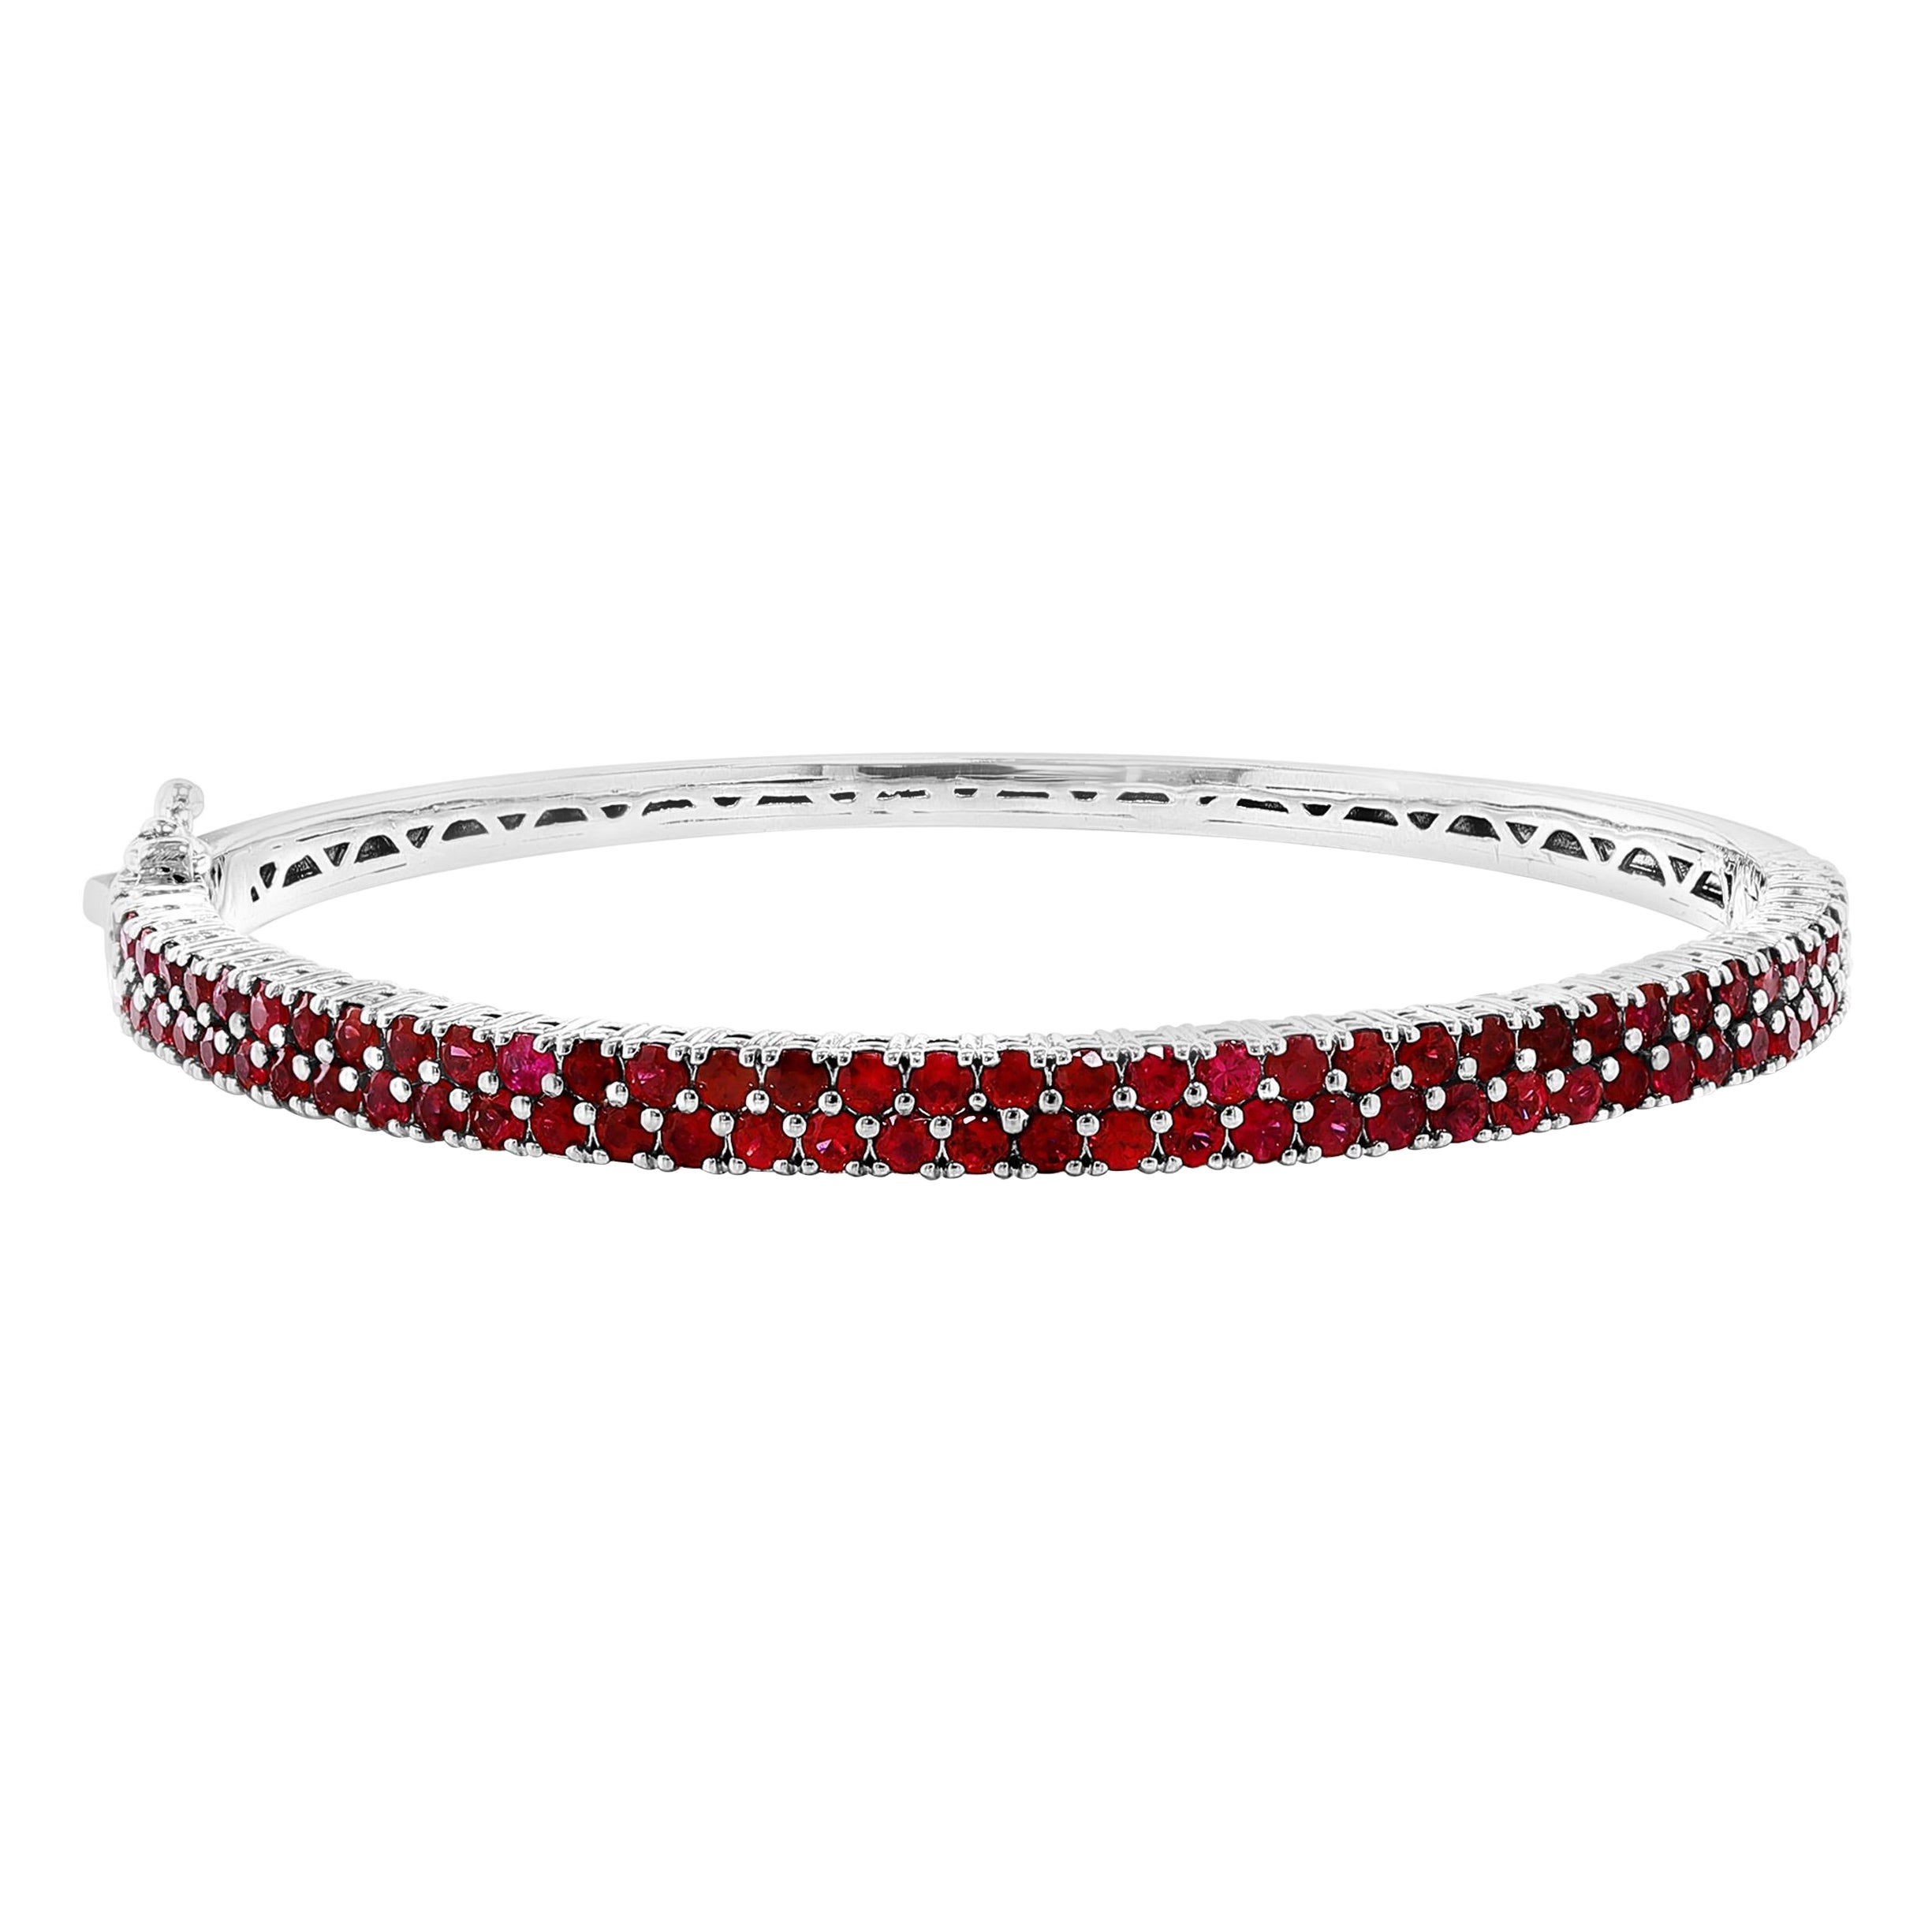 3.53 Carat Round Cut 2 Row Ruby Bangle in 14K White Gold For Sale